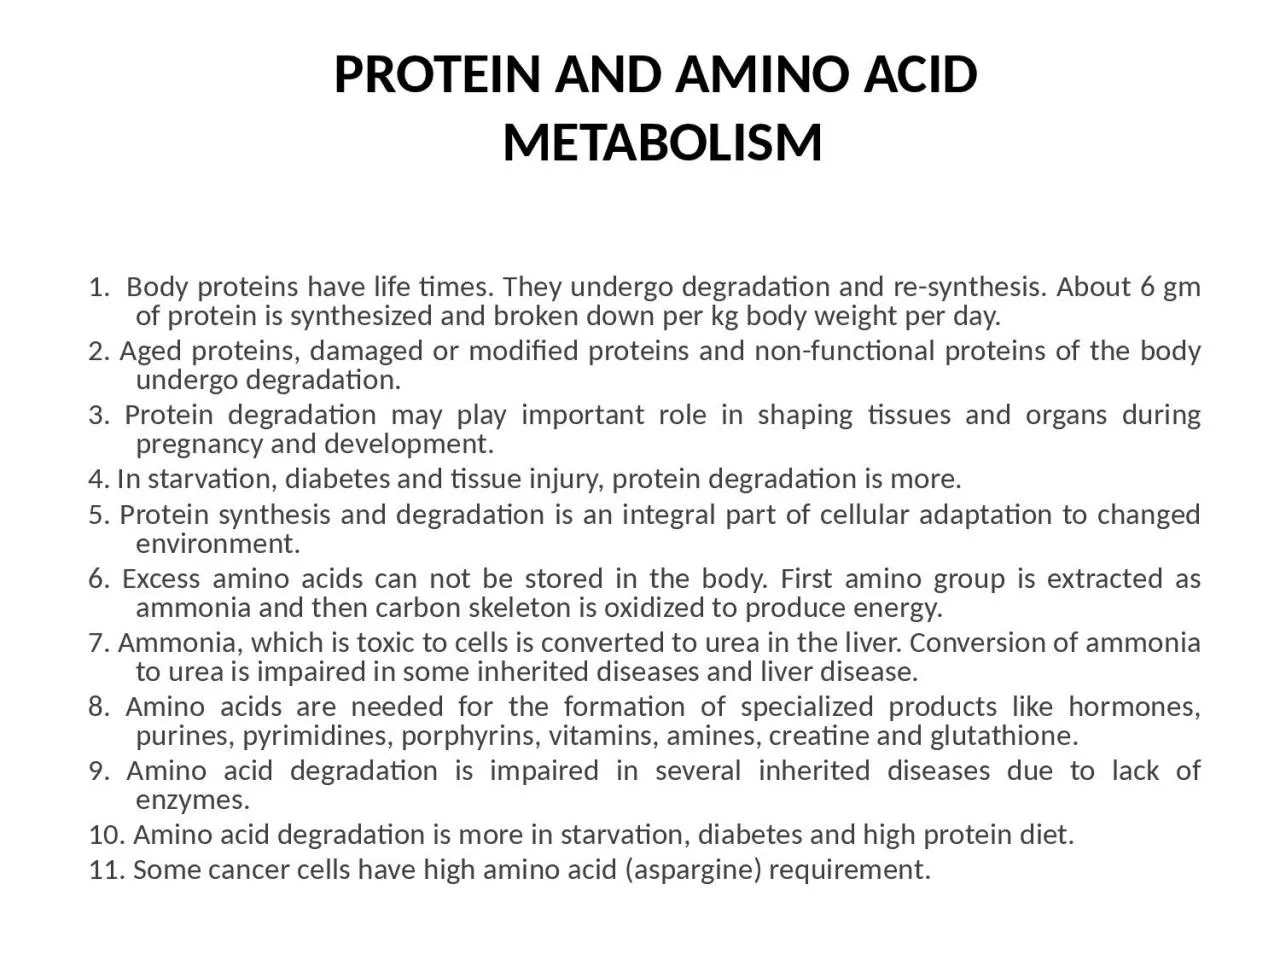 1.  Body proteins have life times. They undergo degradation and re-synthesis. About 6